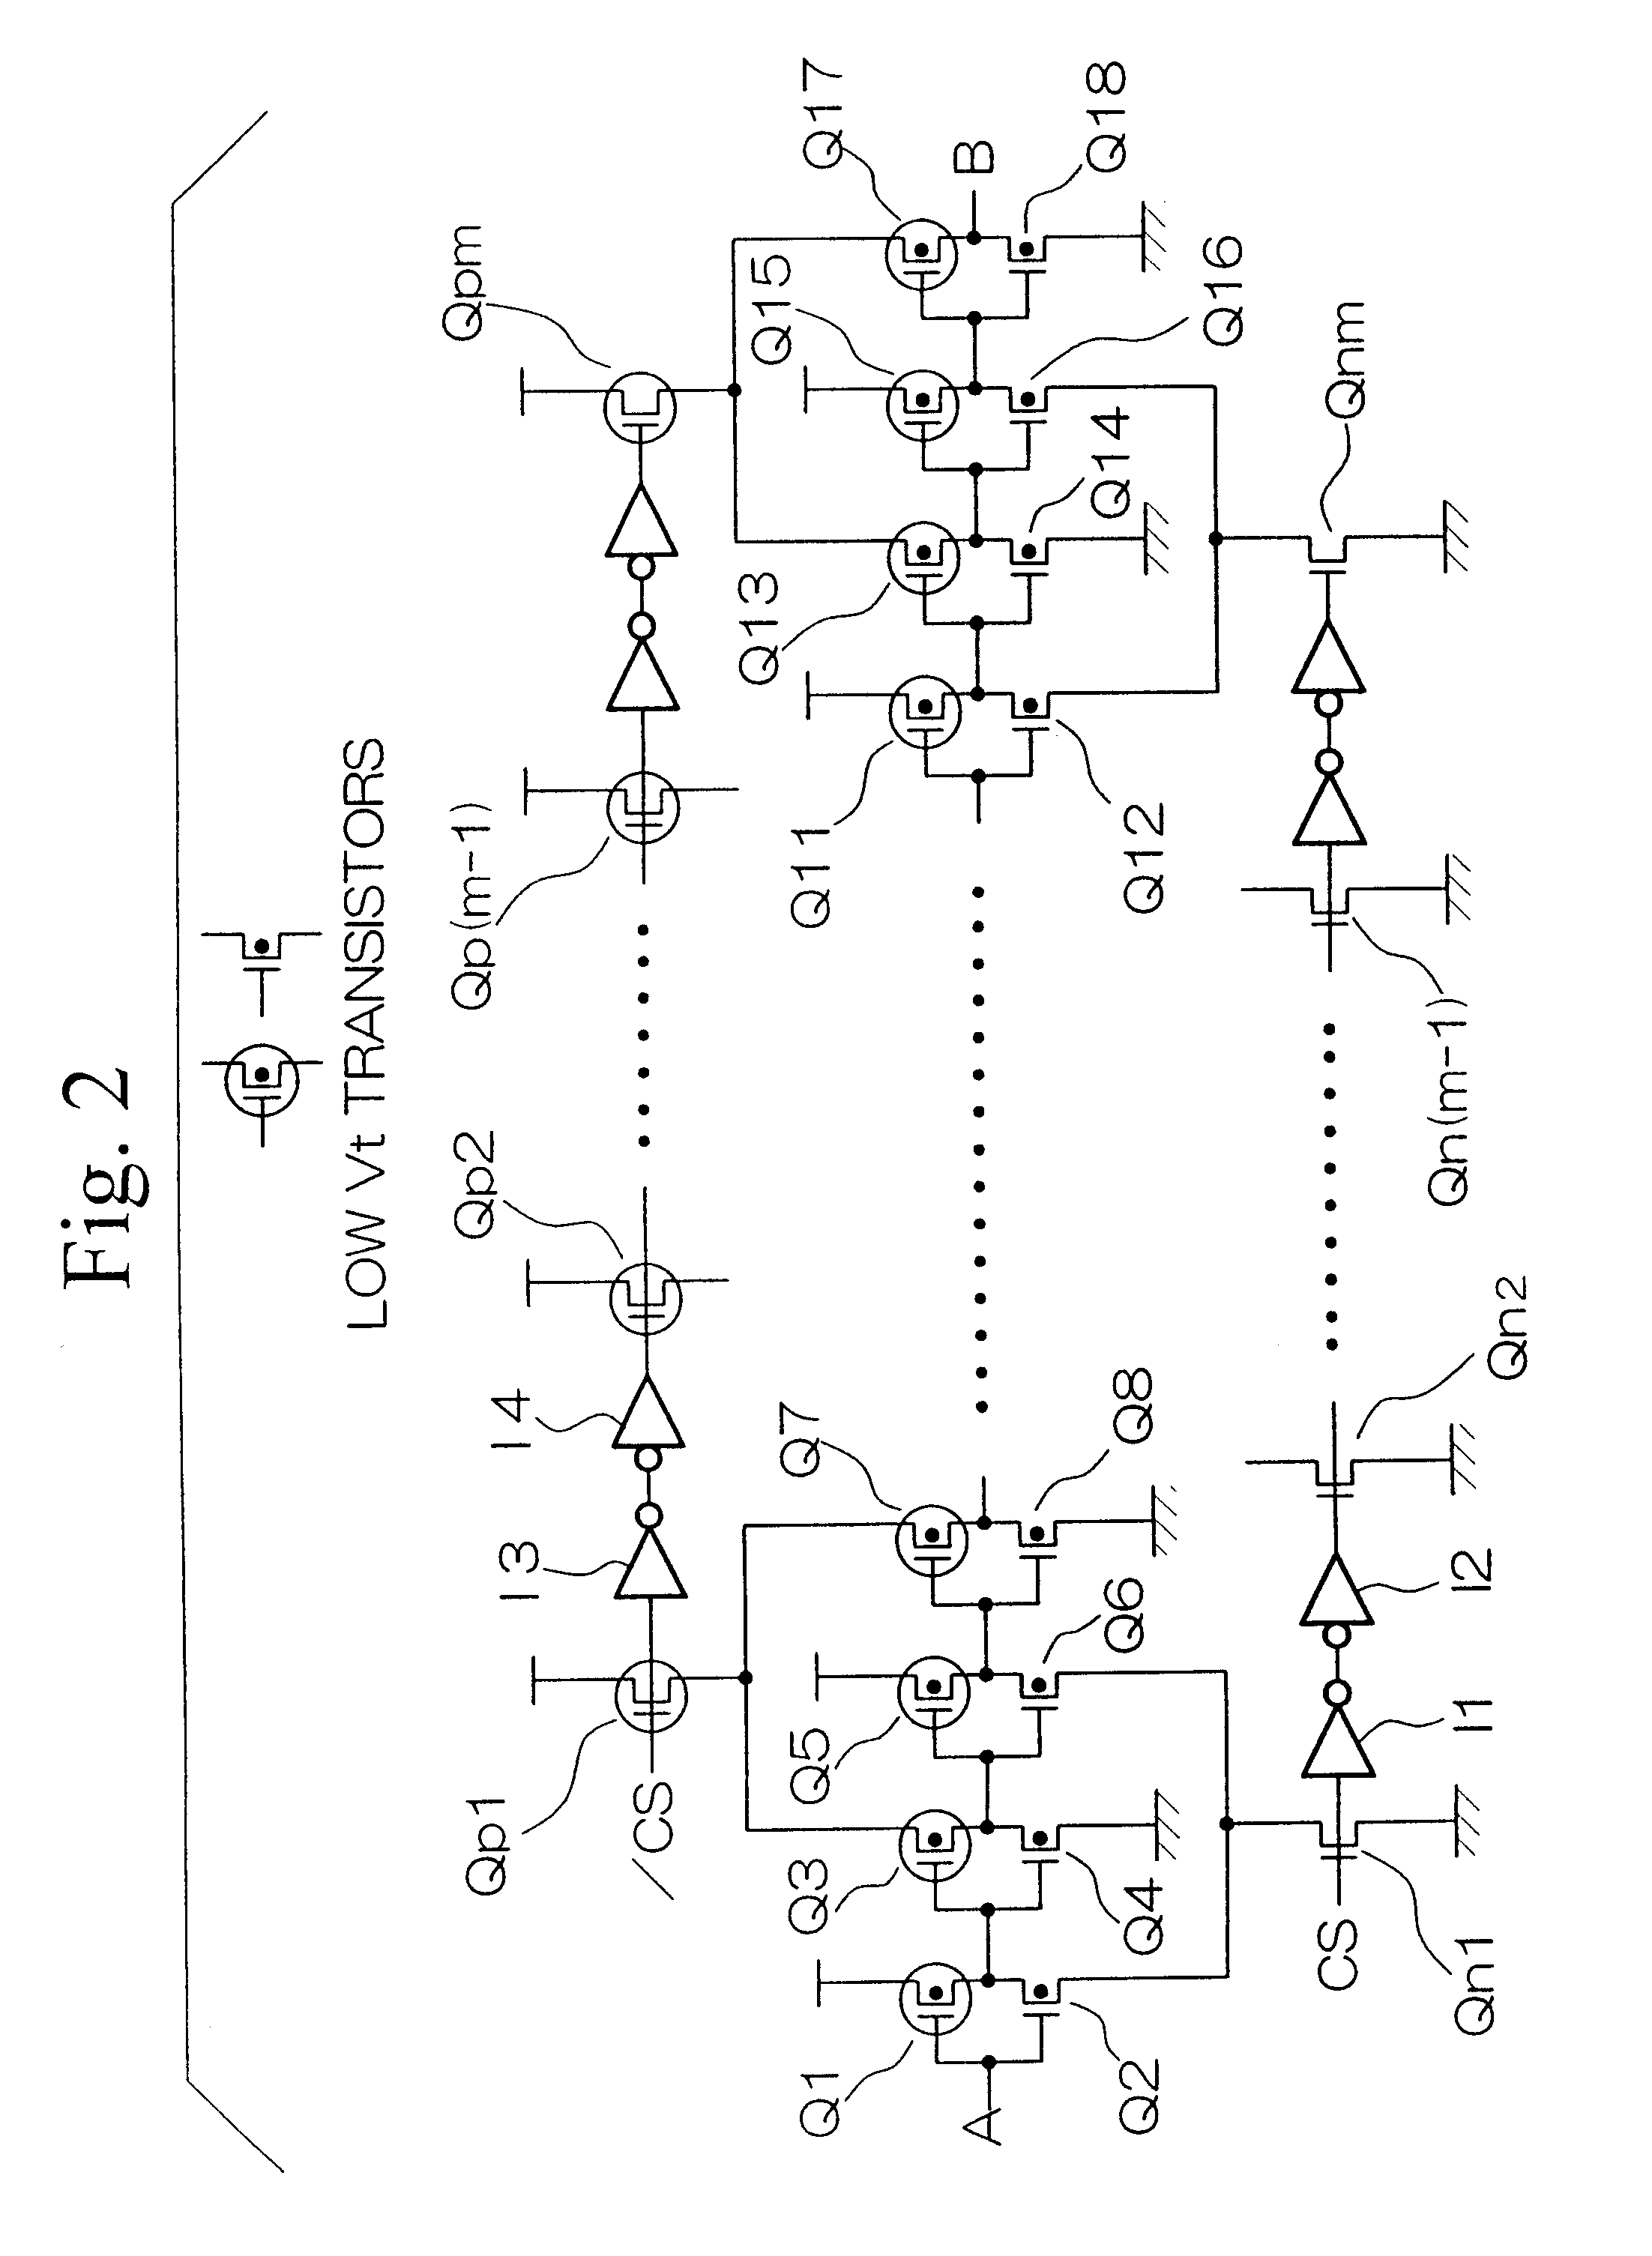 Semiconductor device with power cutting transistors